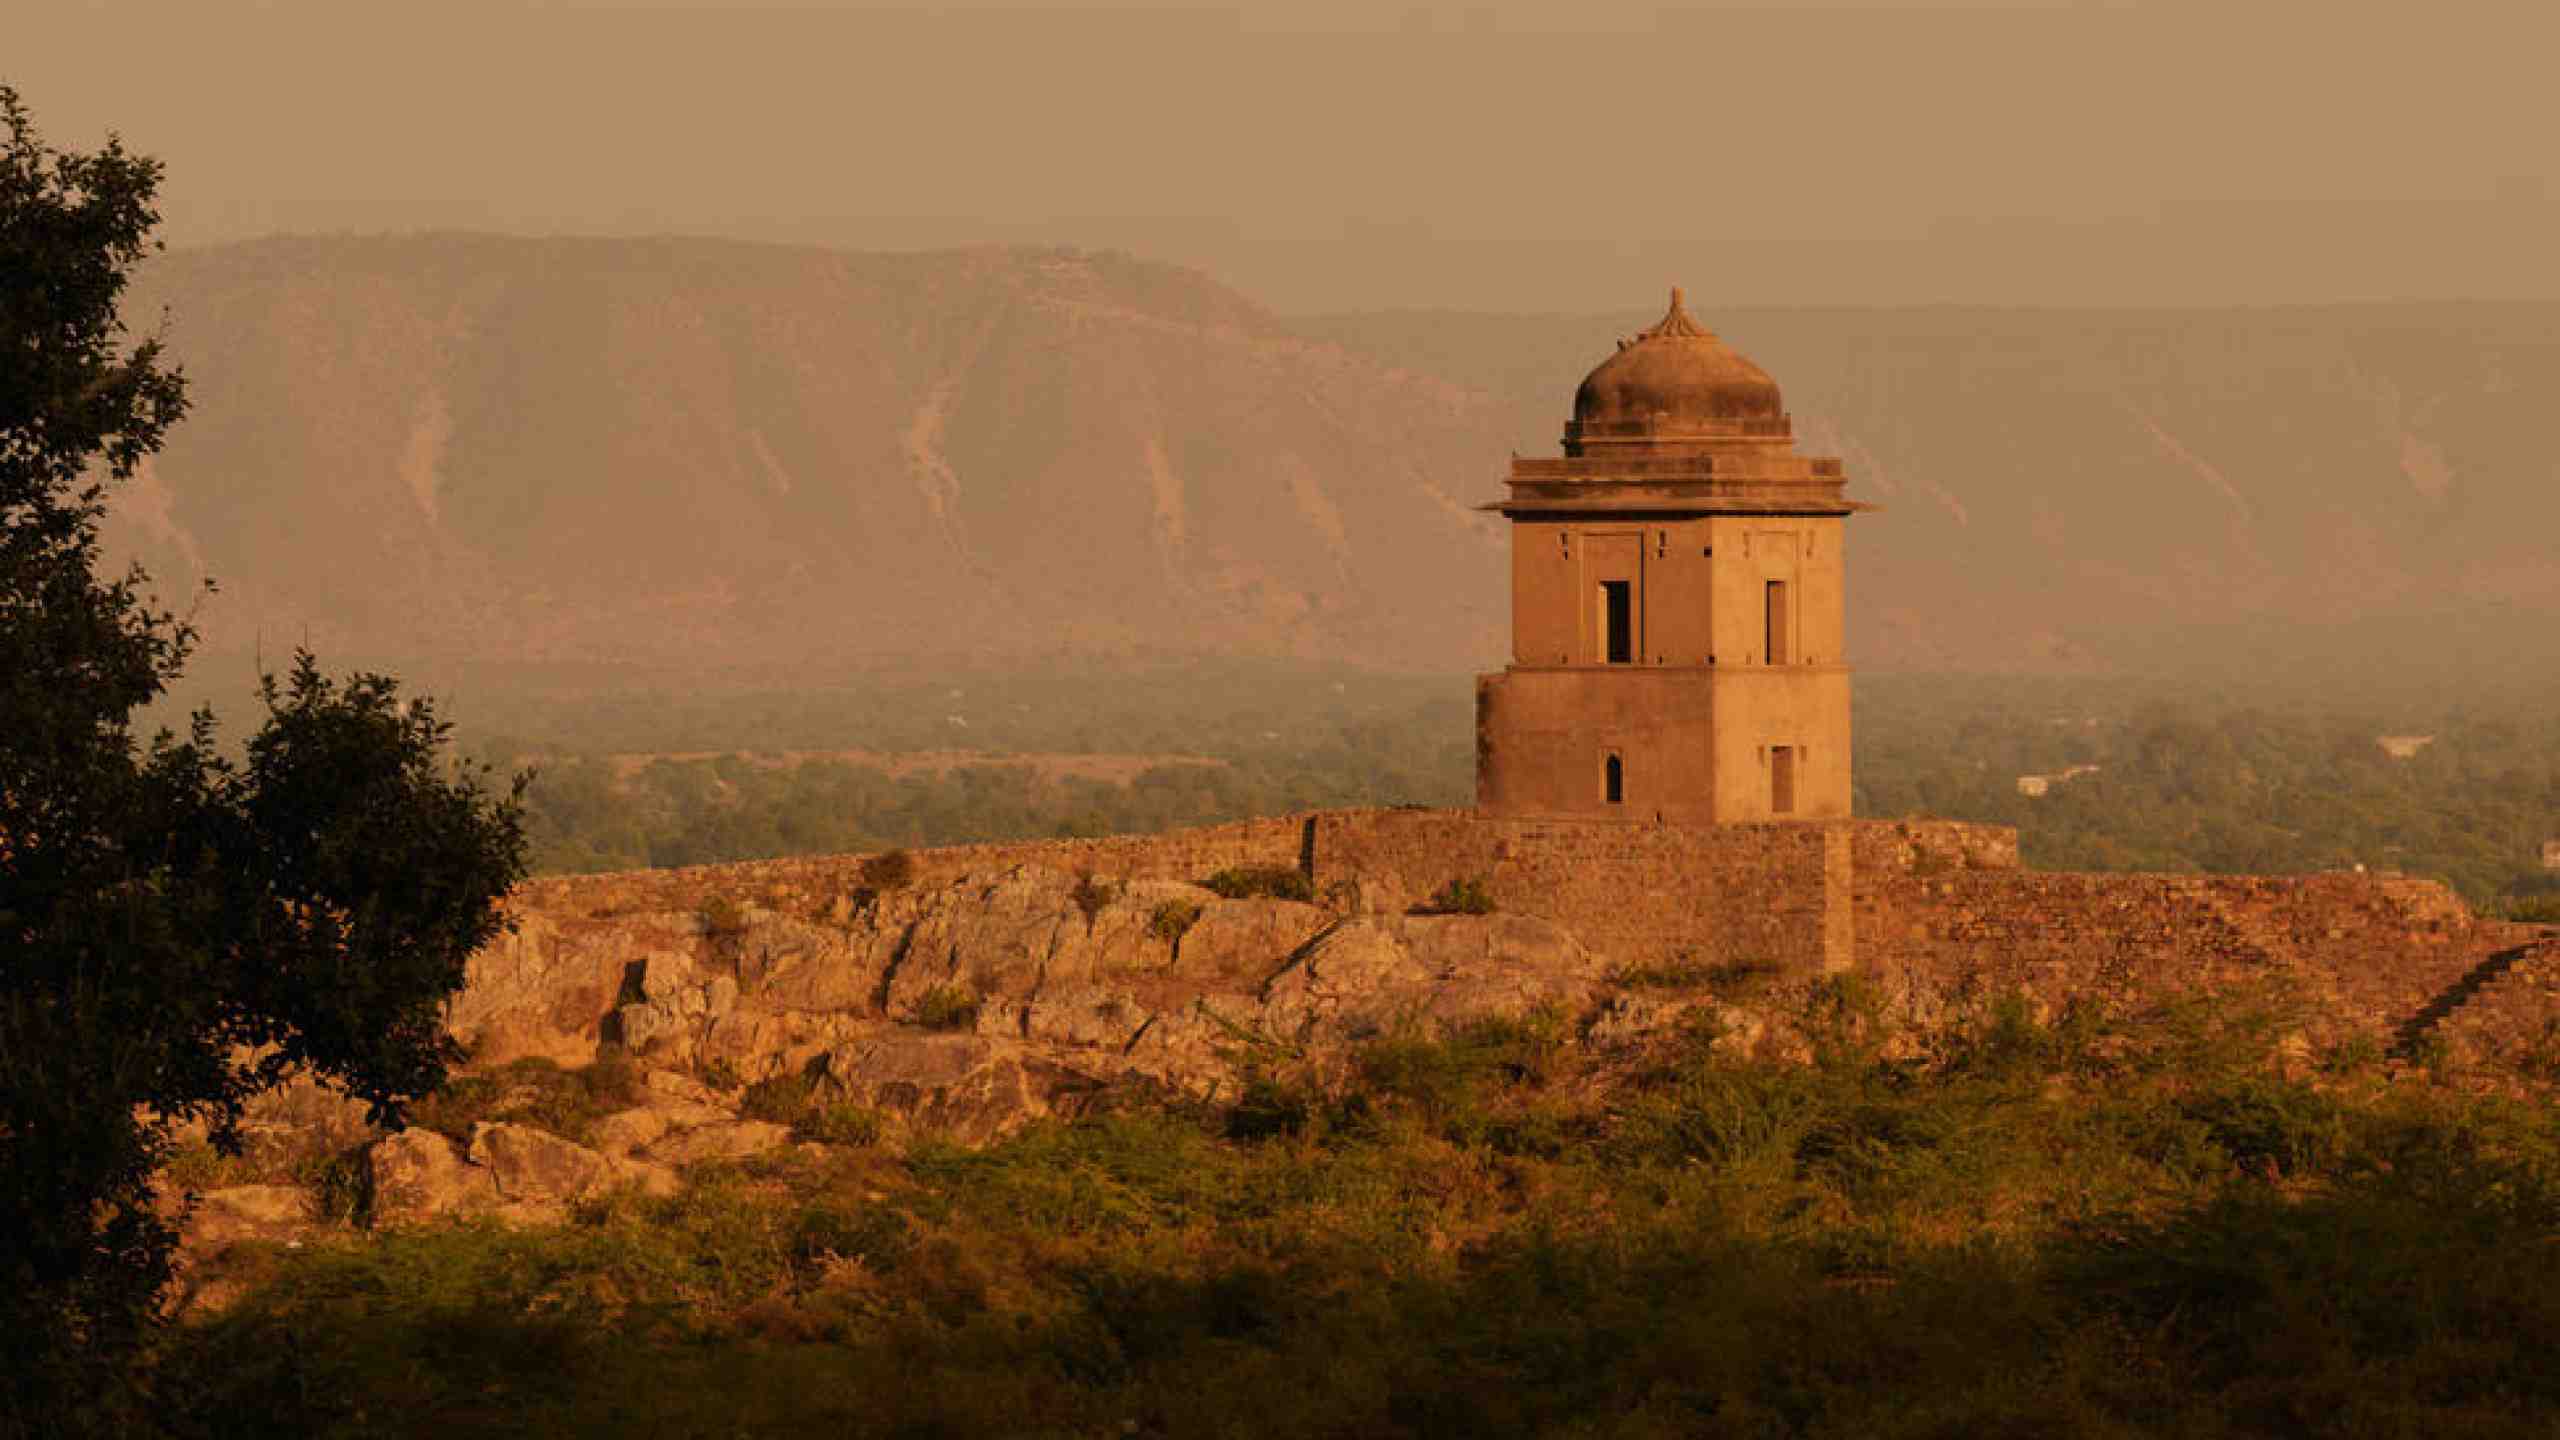 amanbagh-ruins-tower-experience-india